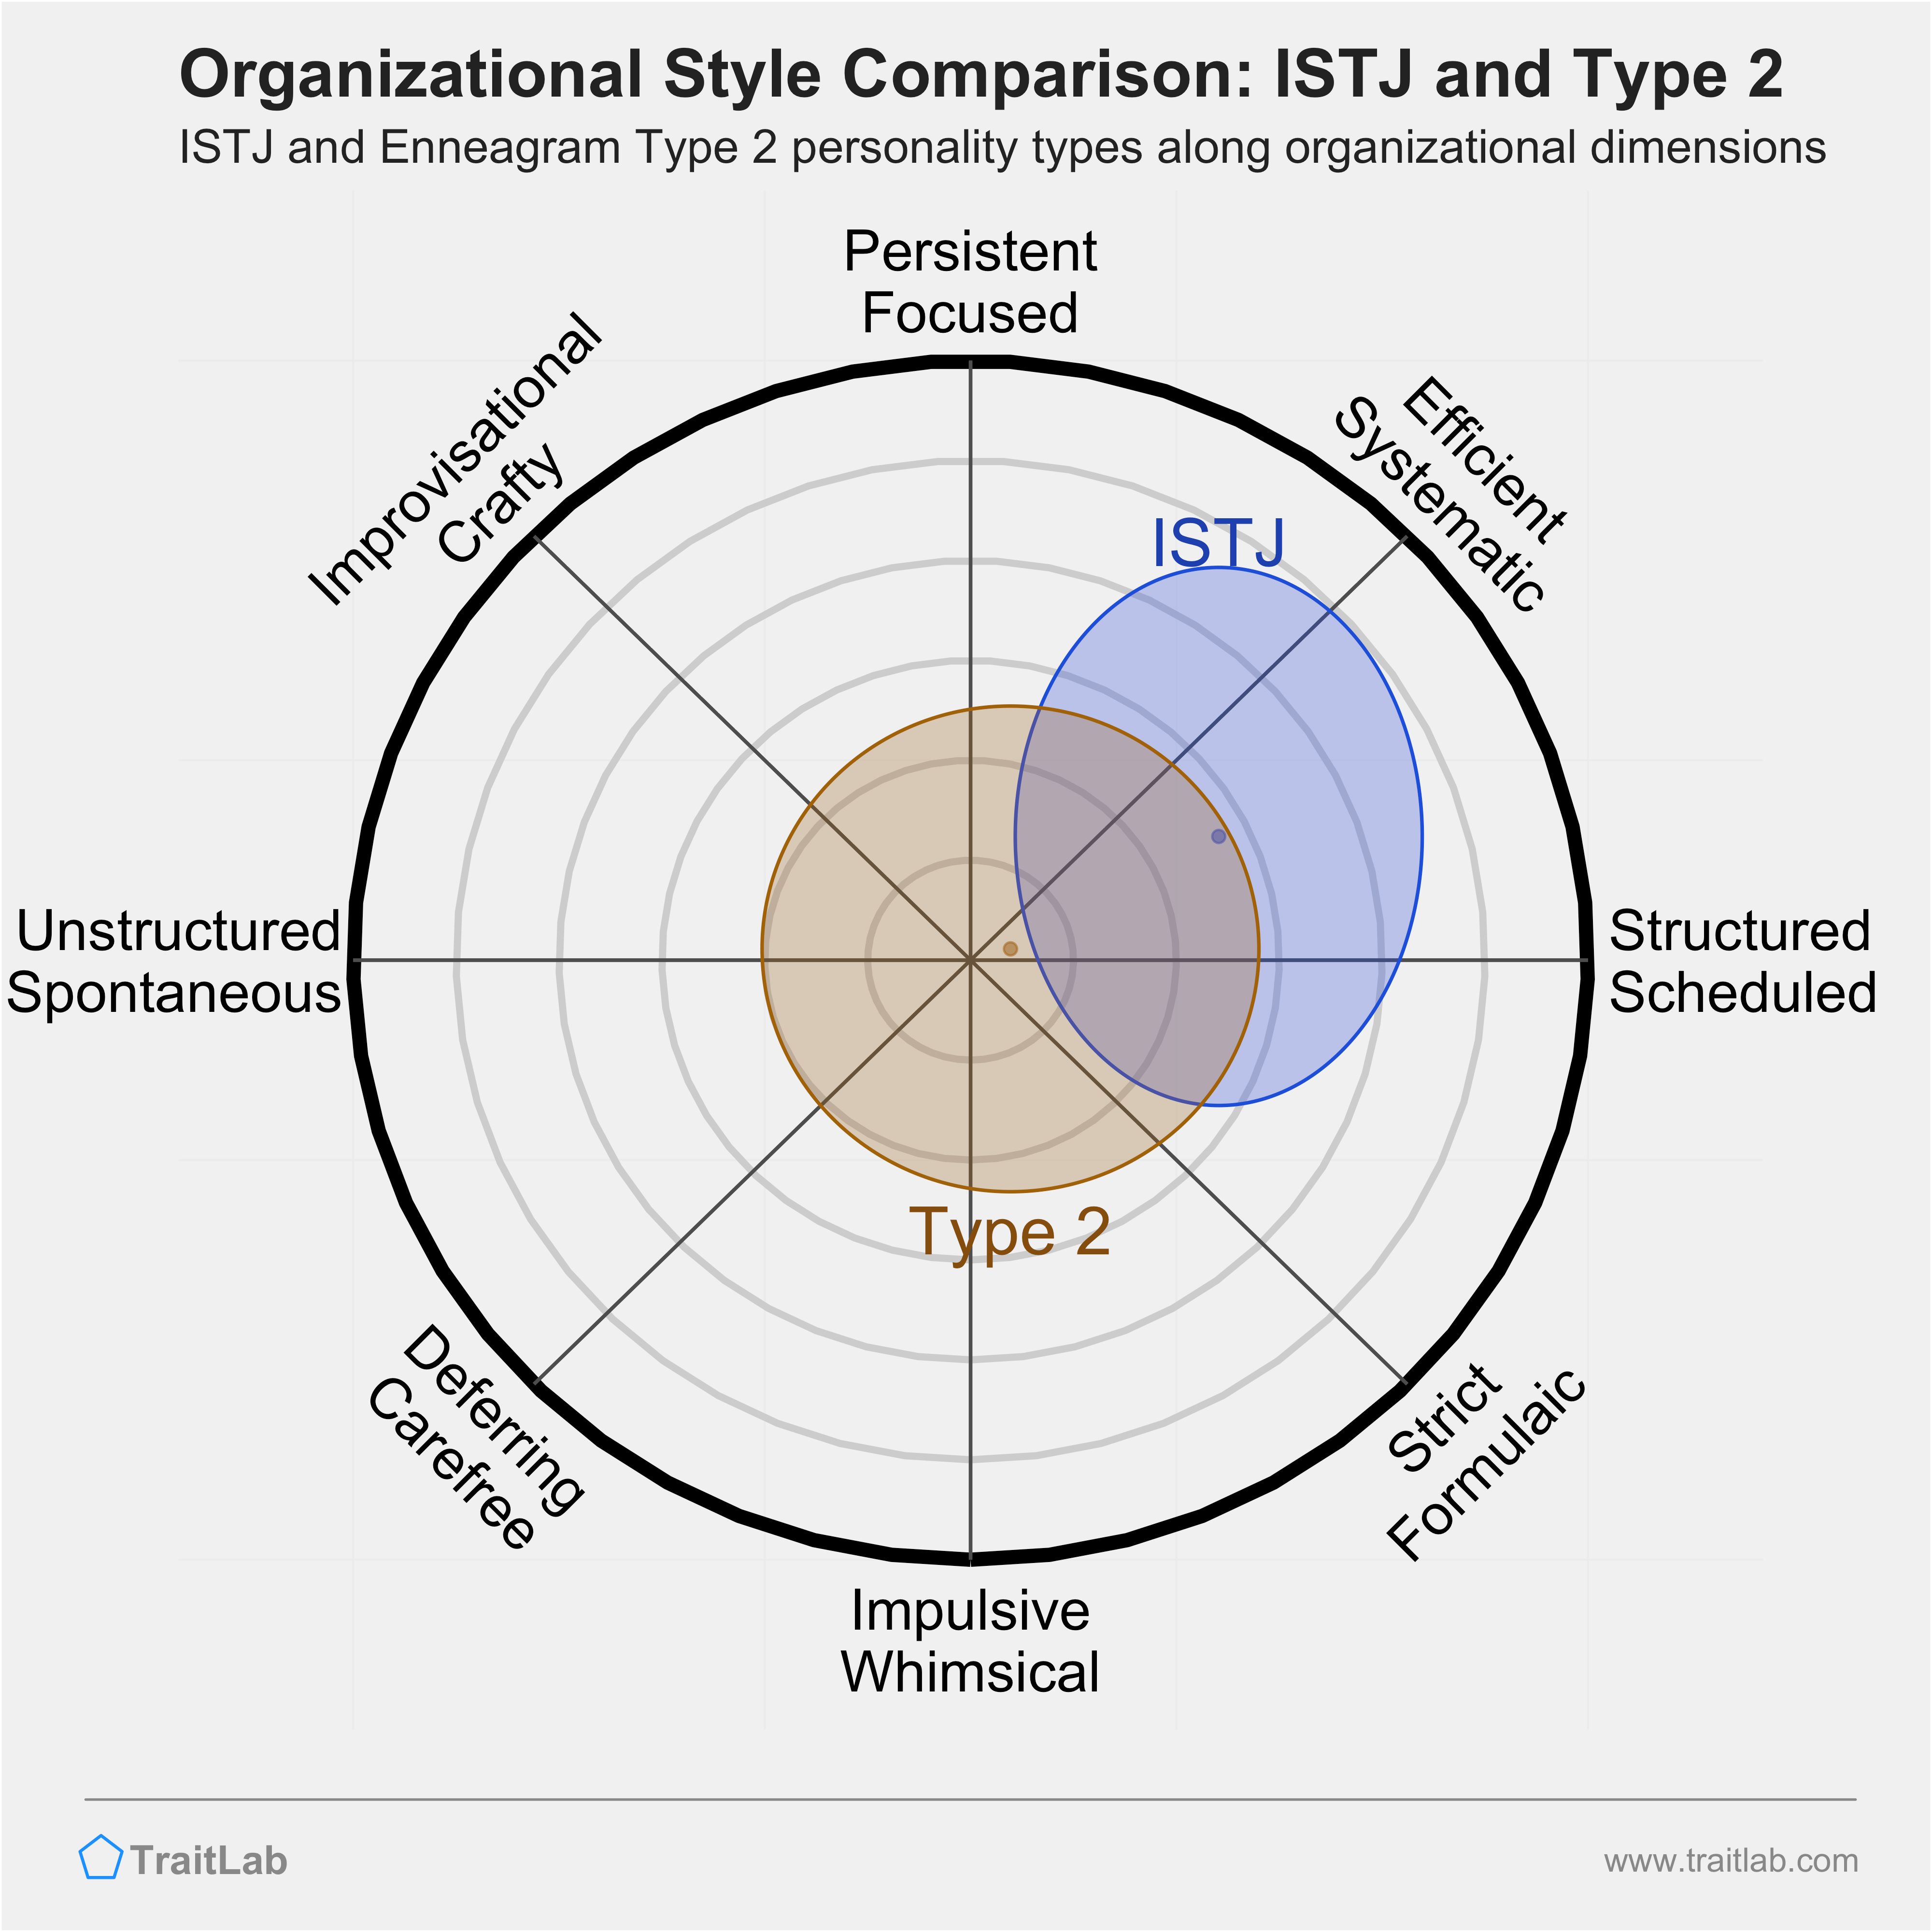 ISTJ and Type 2 comparison across organizational dimensions